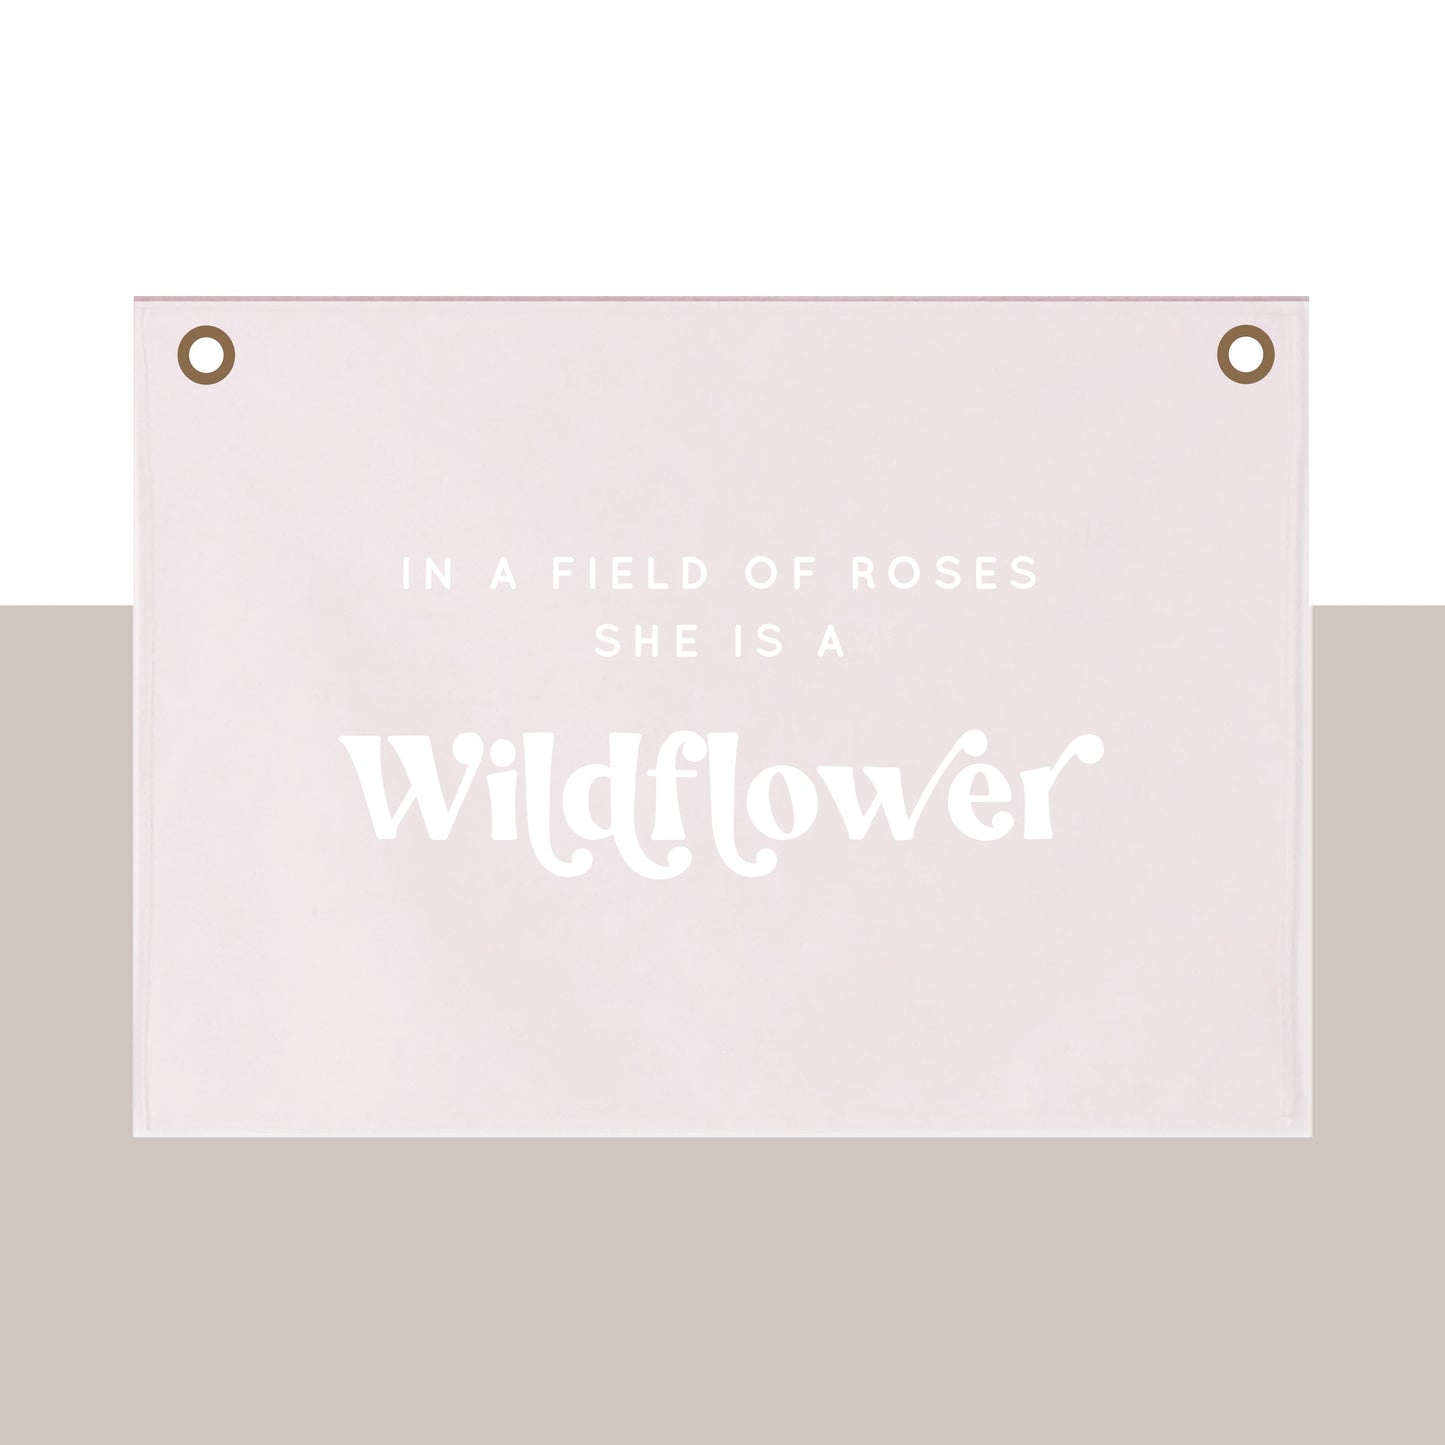 Wildflower Wall Hanging 70x50cm - limited edition pink